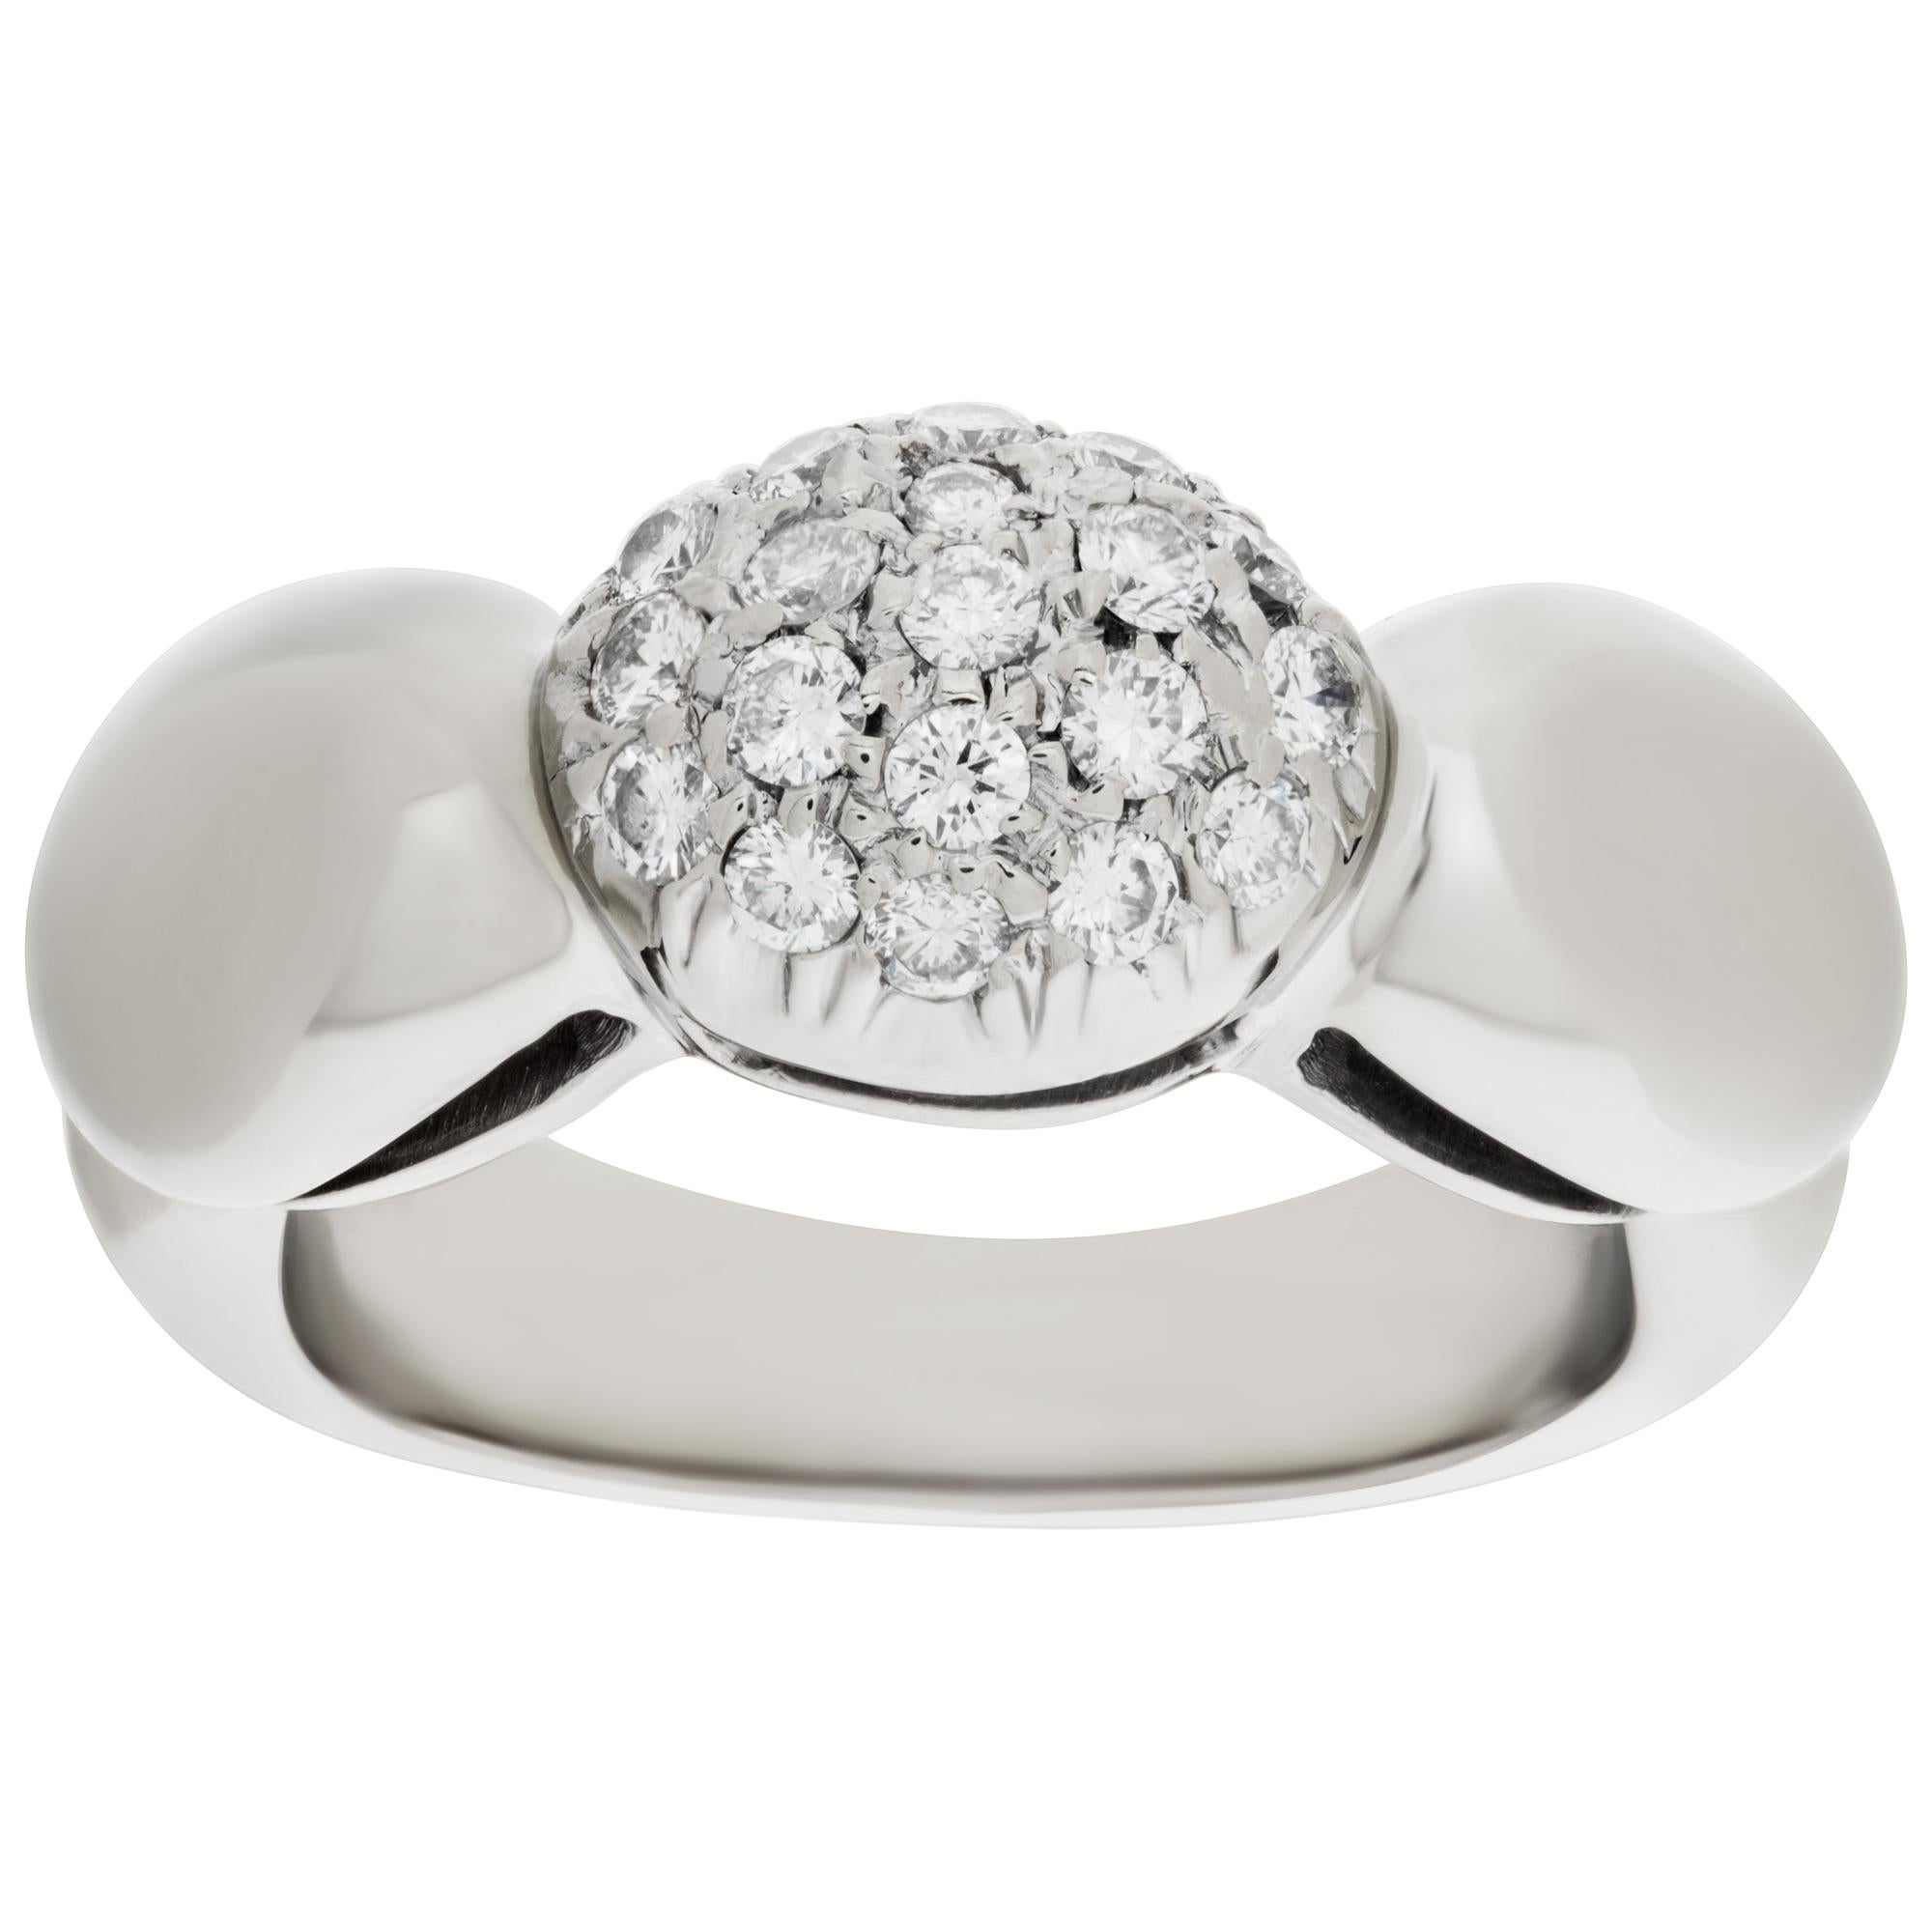 Darling domed diamond ring in 18k white gold with approximately 0.38 carat in round pave diamonds. Size 3.This Diamond ring is currently size 3 and some items can be sized up or down, please ask! It weighs 4.5 pennyweights and is 18k White Gold.
